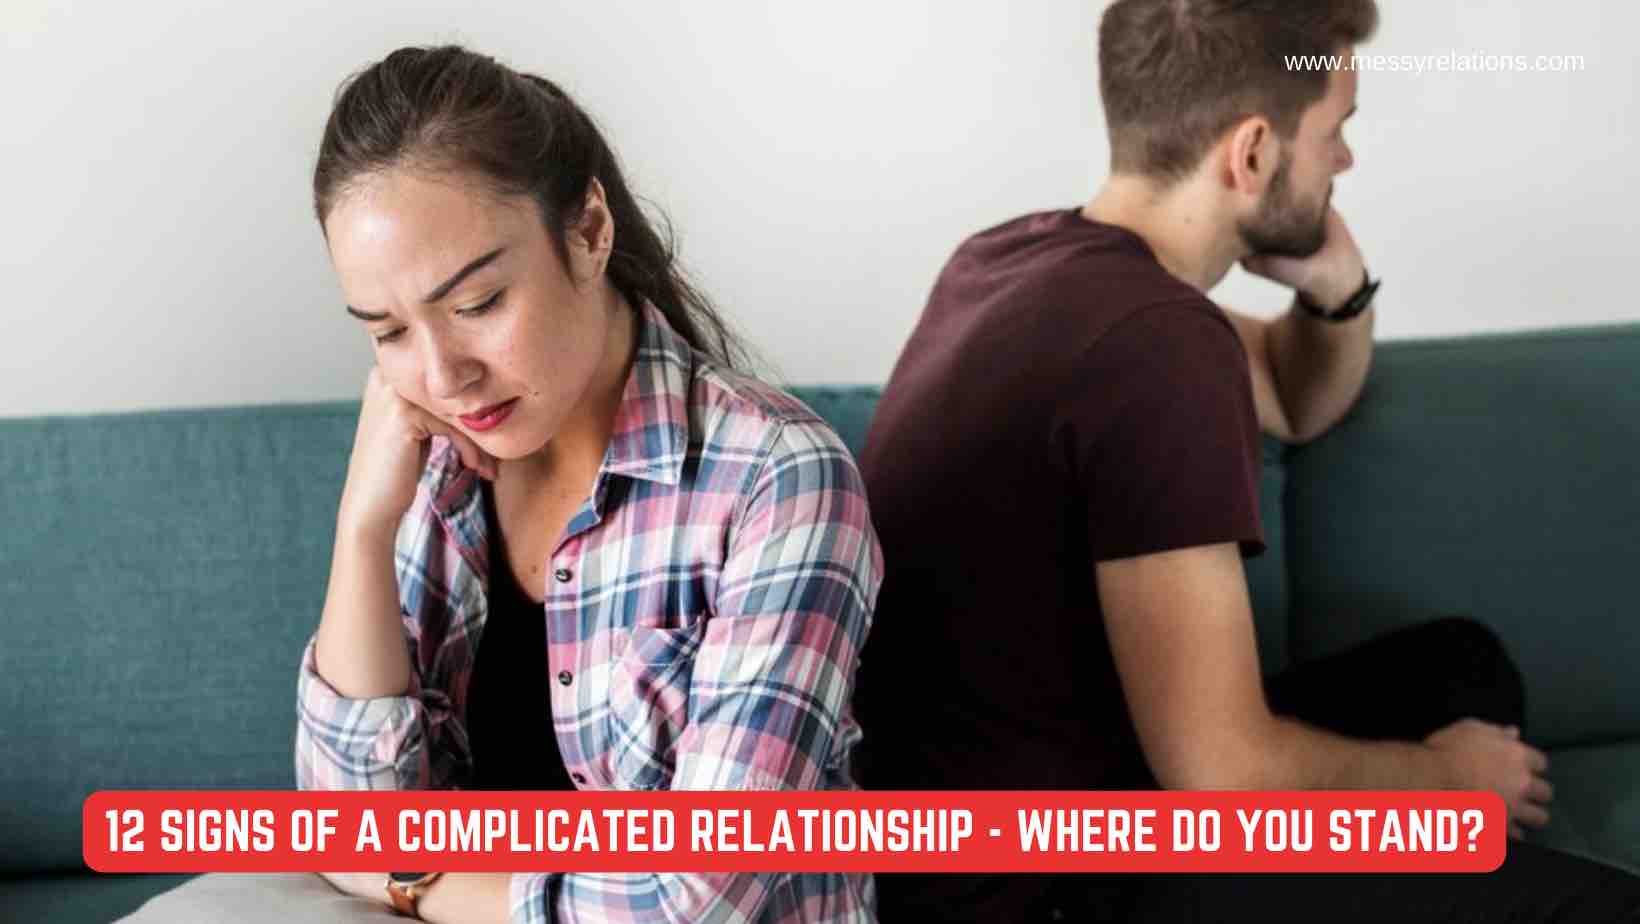 Signs of complicated relationship